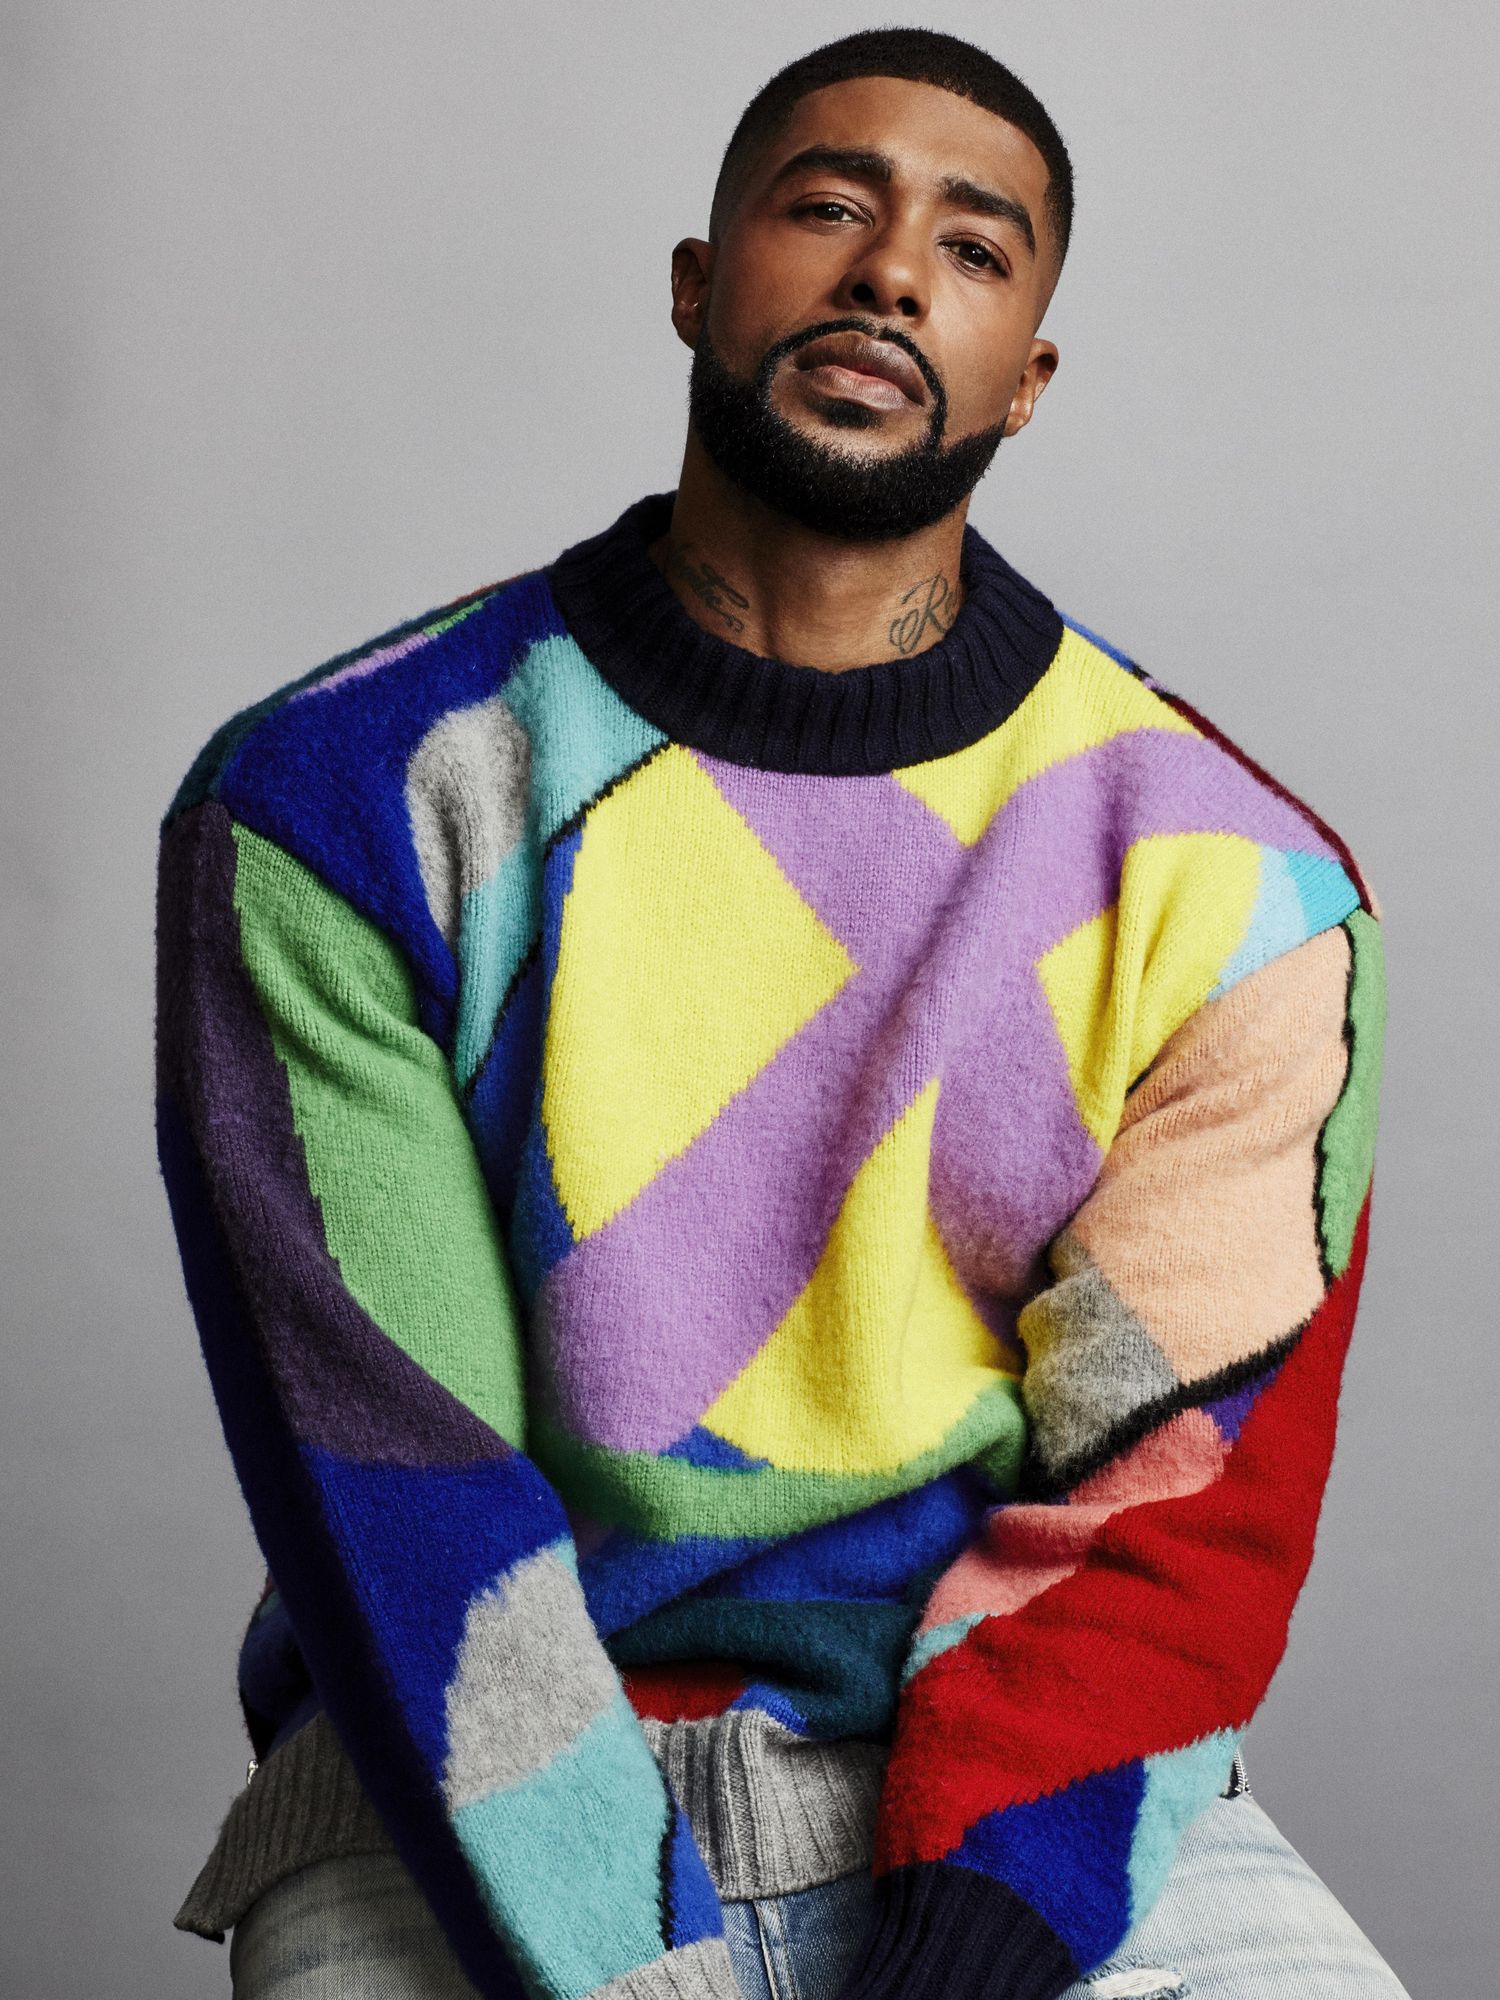 ​Skyh Alvester Black seated and shown from the waist up wearing a bright multicolored pullover sweater.